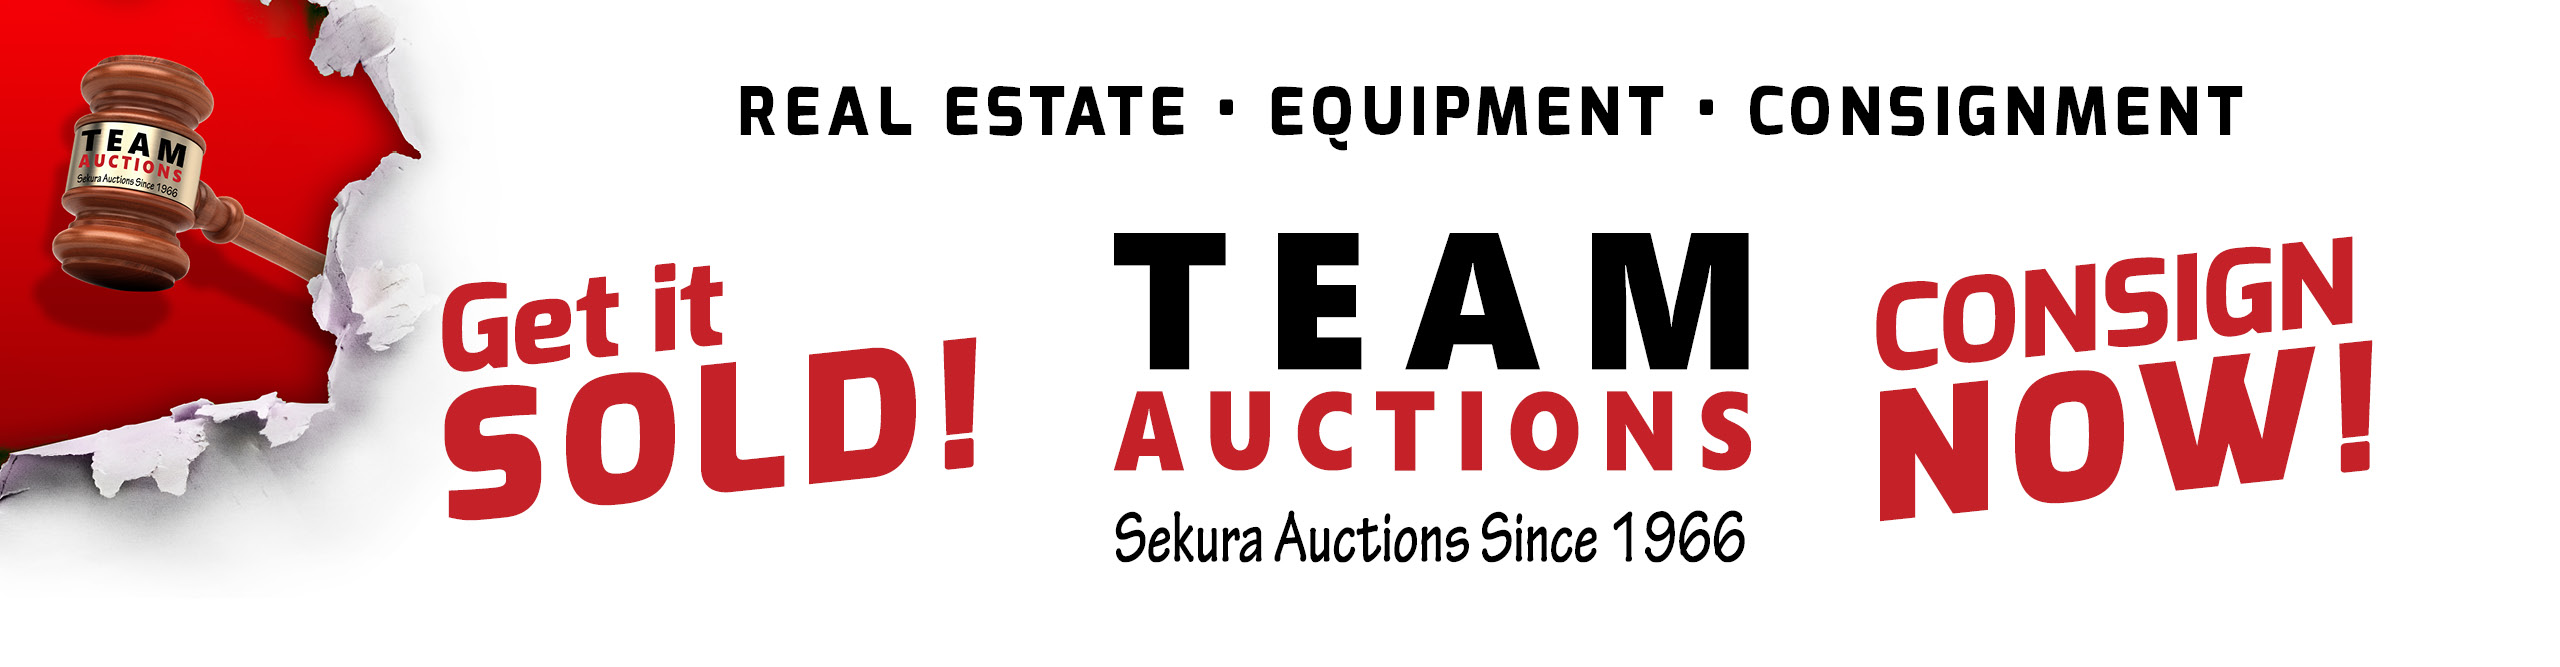 Team Auctions  Complete Real Estate, Equipment & Consignment Auction Center